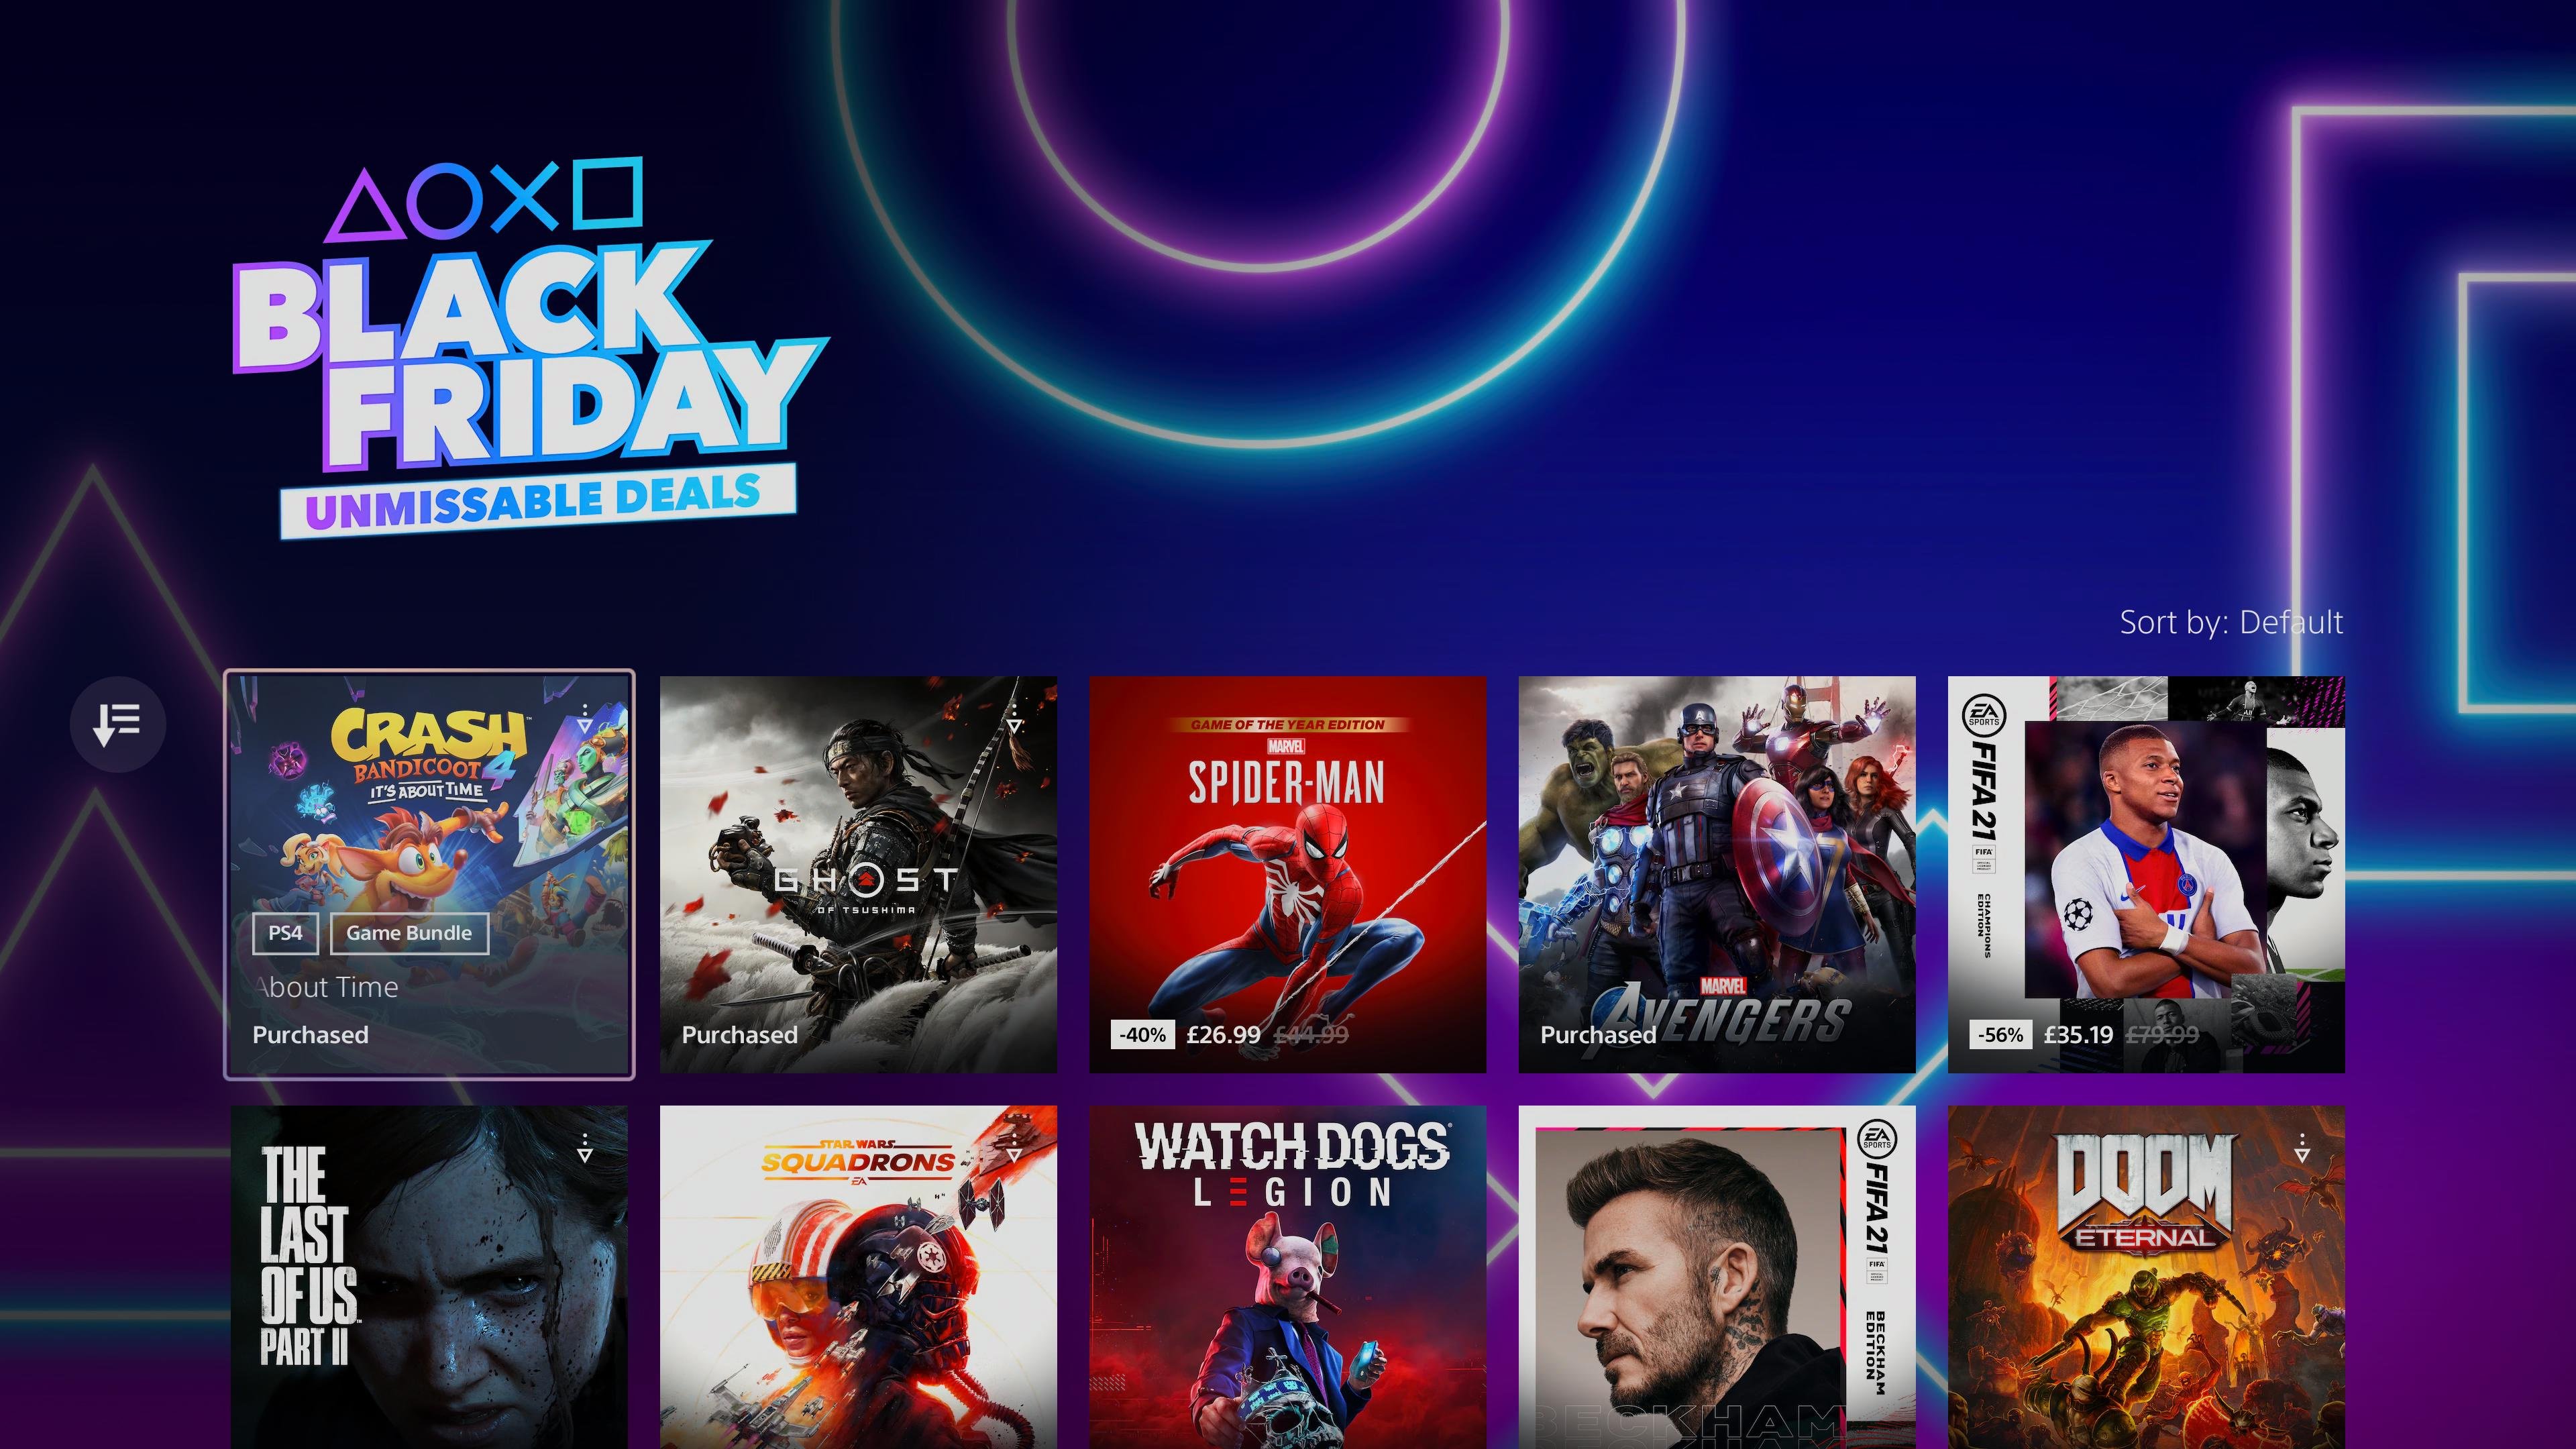 PS5 Now Lists Black Friday Sale in PS Store, But No Deals Section Yet